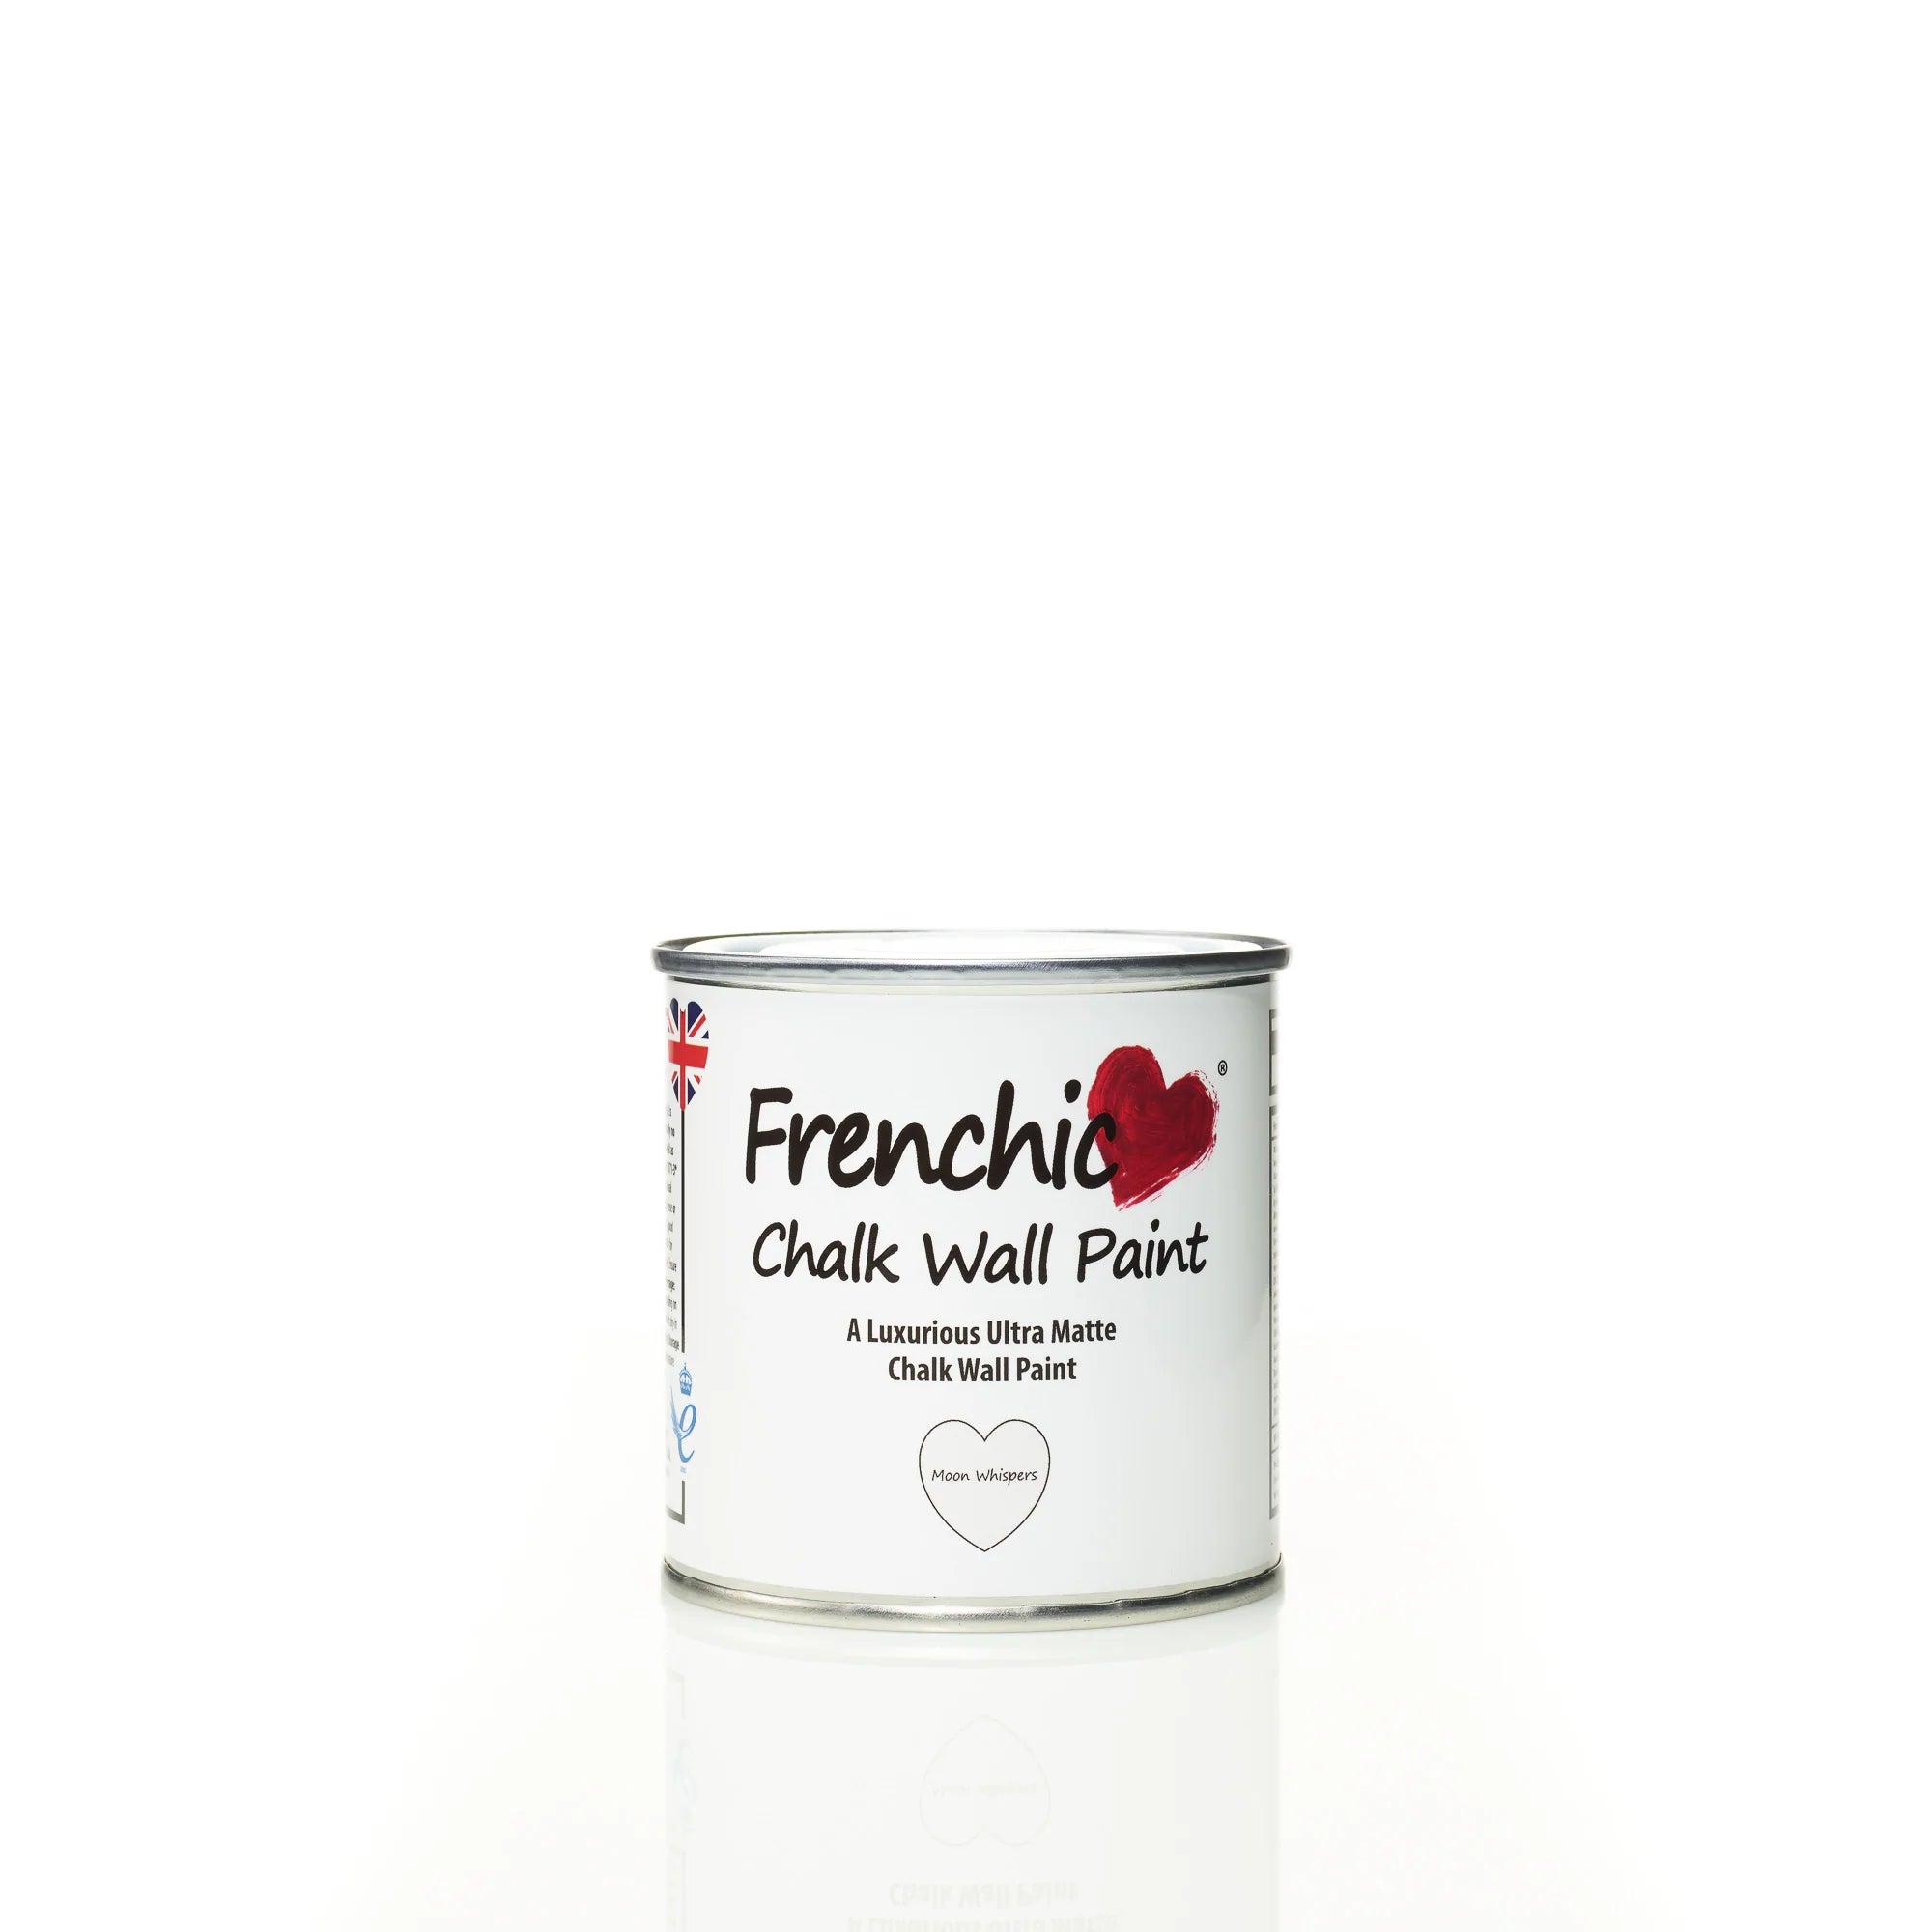 Frenchic Paint | Moon Whispers Chalk Wall Paint by Weirs of Baggot St